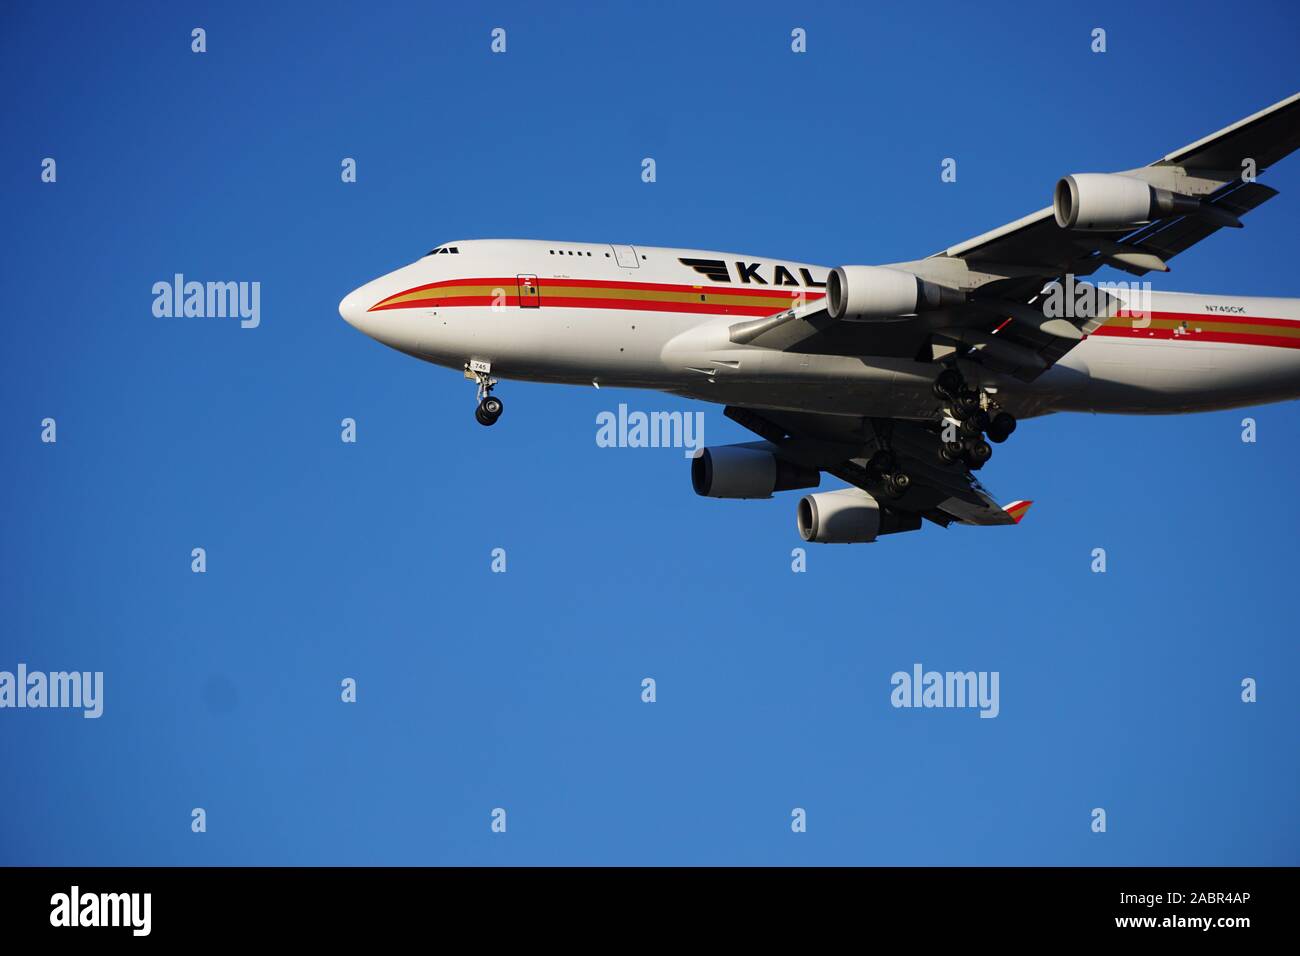 Kalitta Air Boeing 747 on approach to Chicago's O'Hare International Airport from Liege, Belgium. Stock Photo